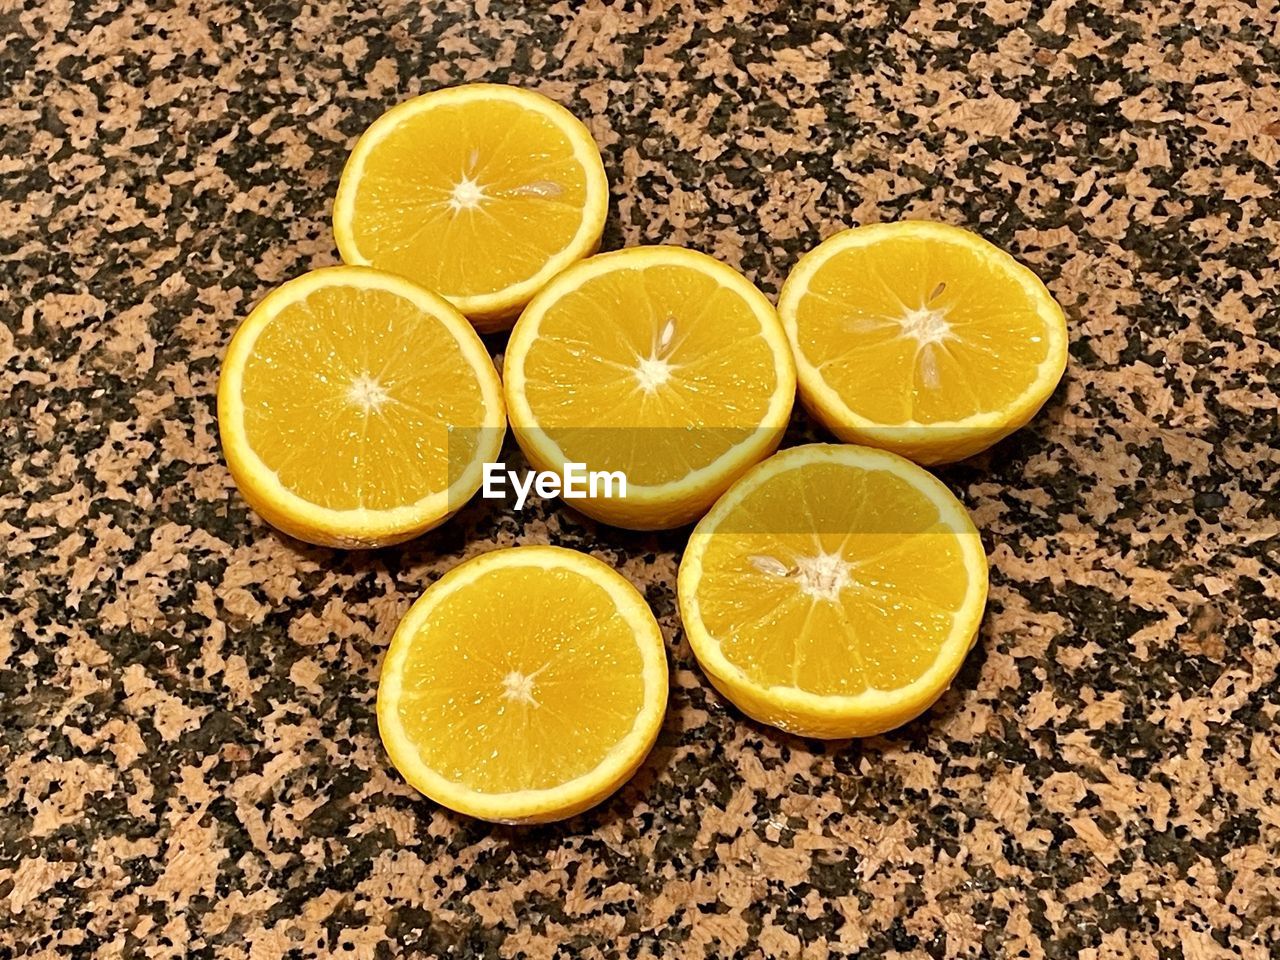 citrus fruit, fruit, food and drink, healthy eating, food, slice, wellbeing, plant, no people, freshness, lemon, orange color, produce, cross section, orange, high angle view, yellow, still life, indoors, soft drink, close-up, drink, refreshment, directly above